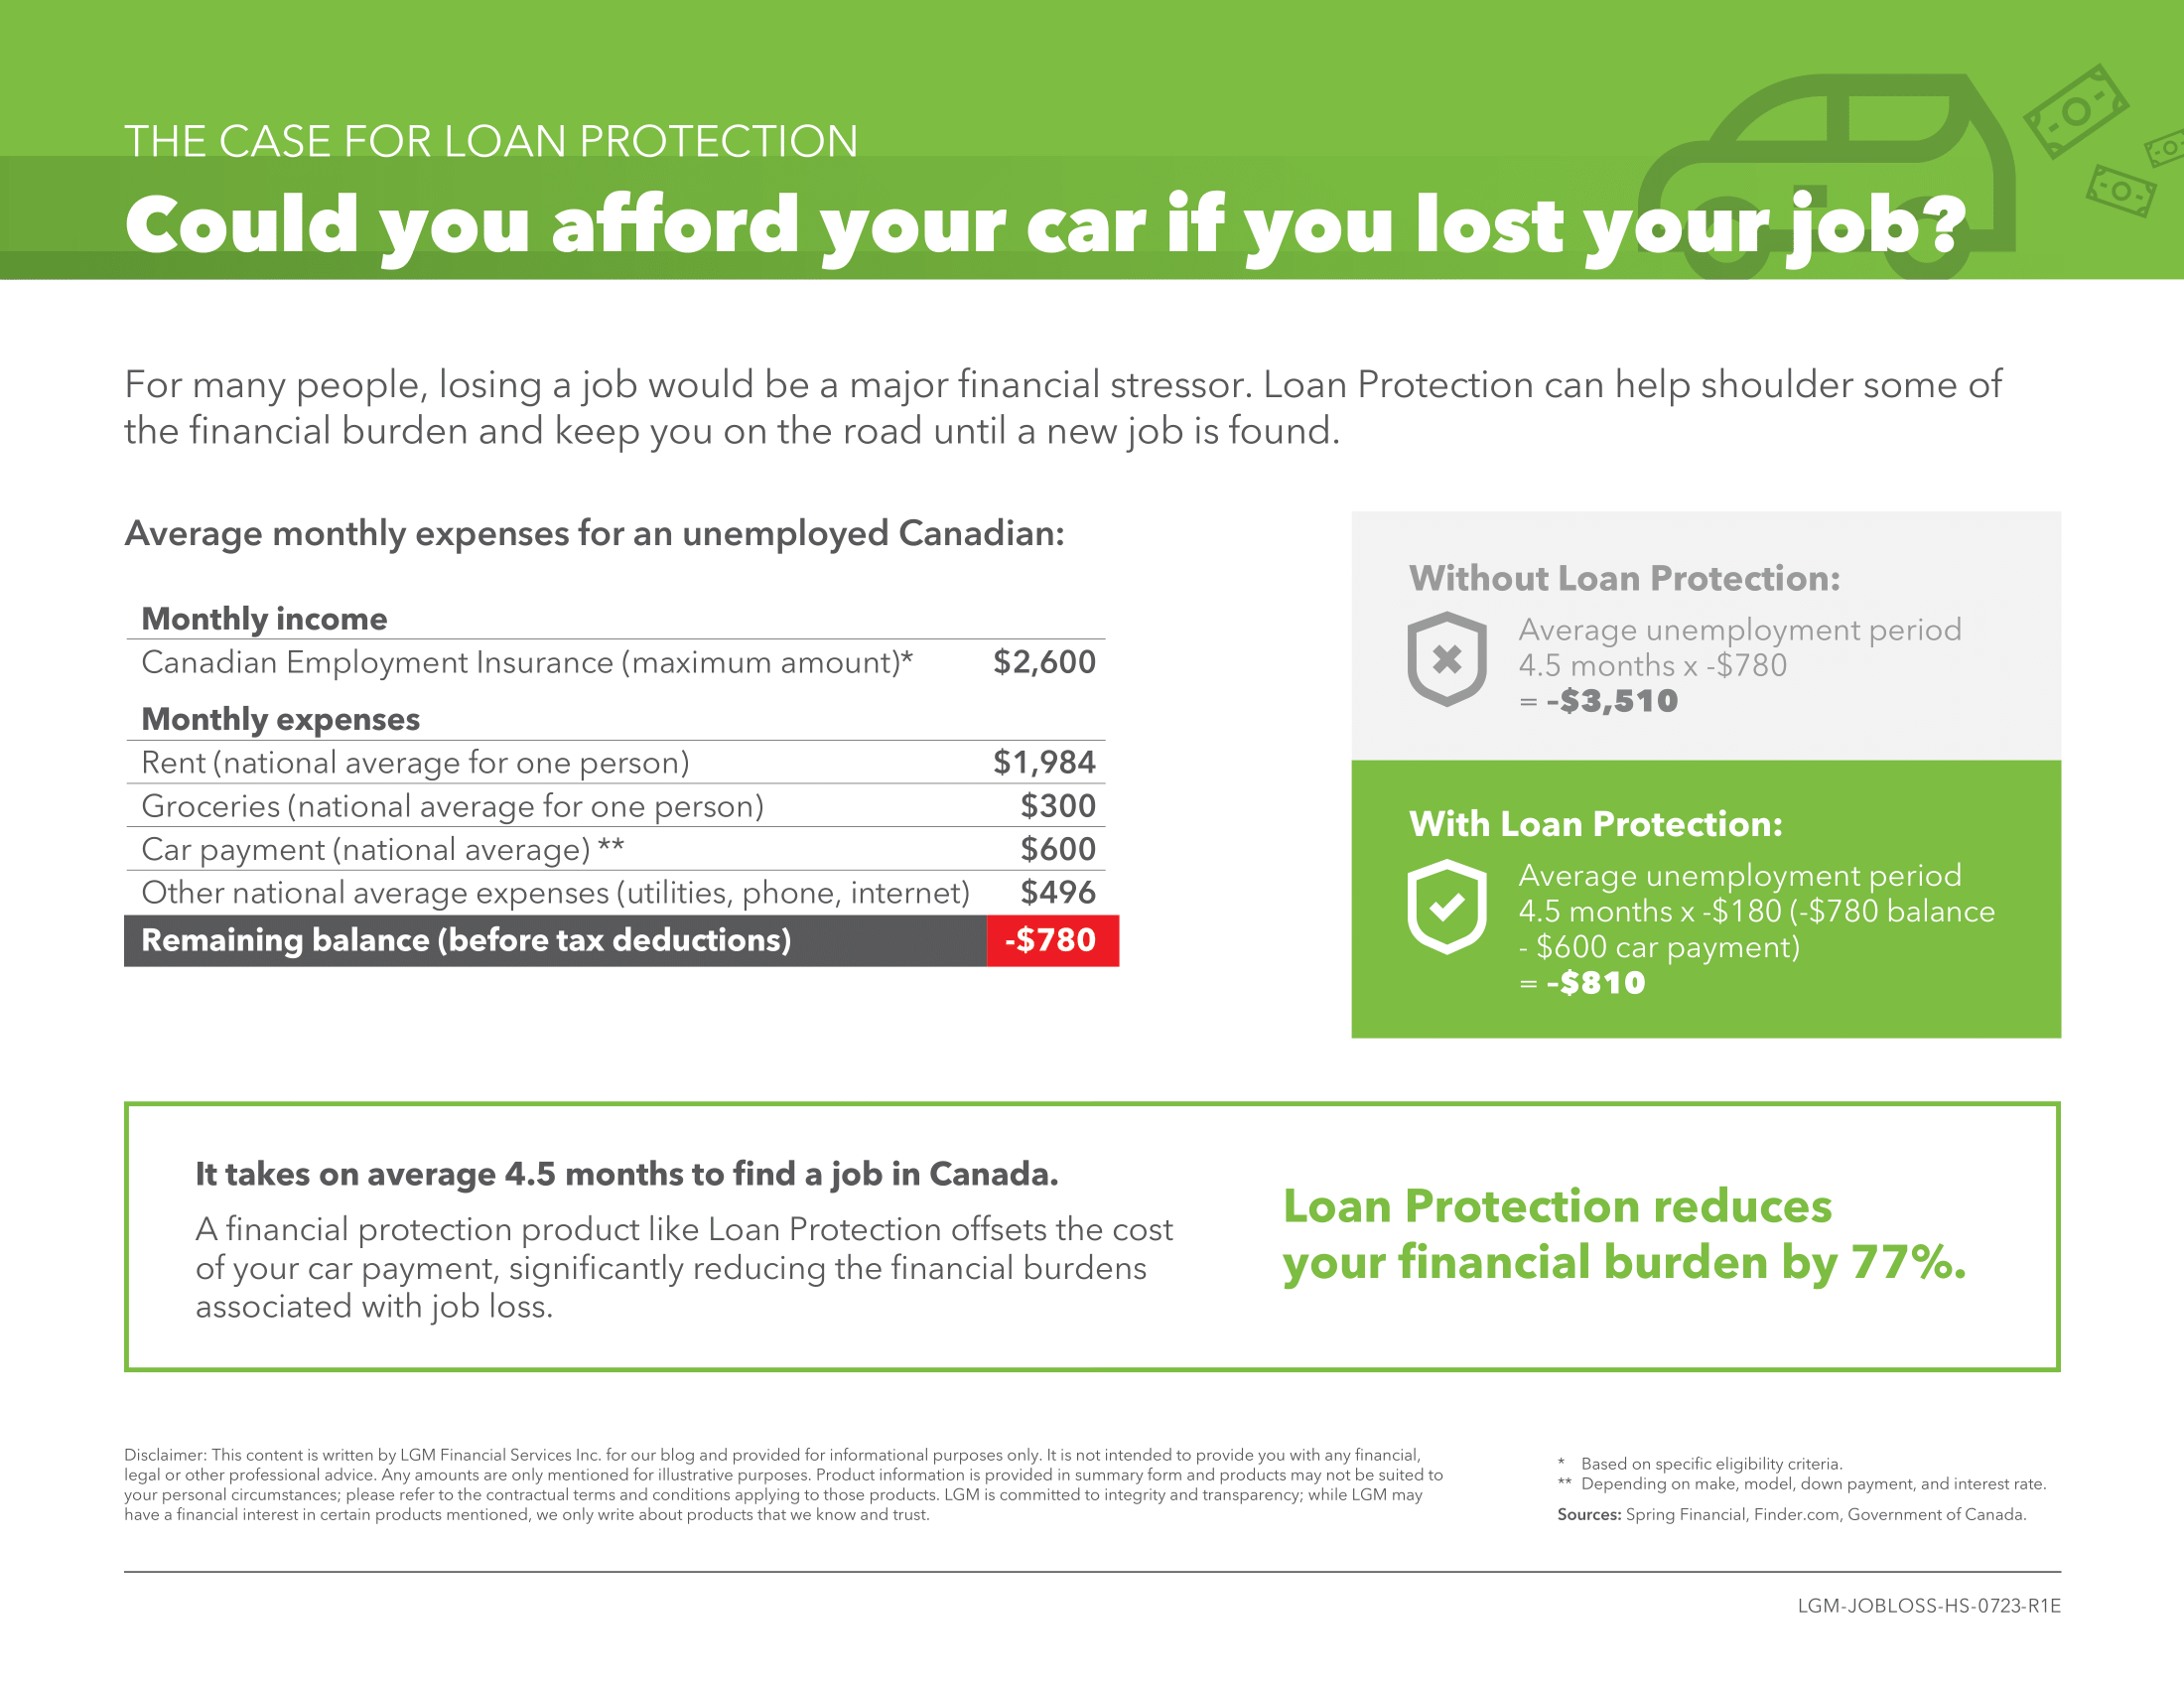 An infographic that displays how one's finances break down in the event of losing their job. With Loan Protection, drivers can reduce their financial burdens by 77% during a time of unexpected unemployment. 